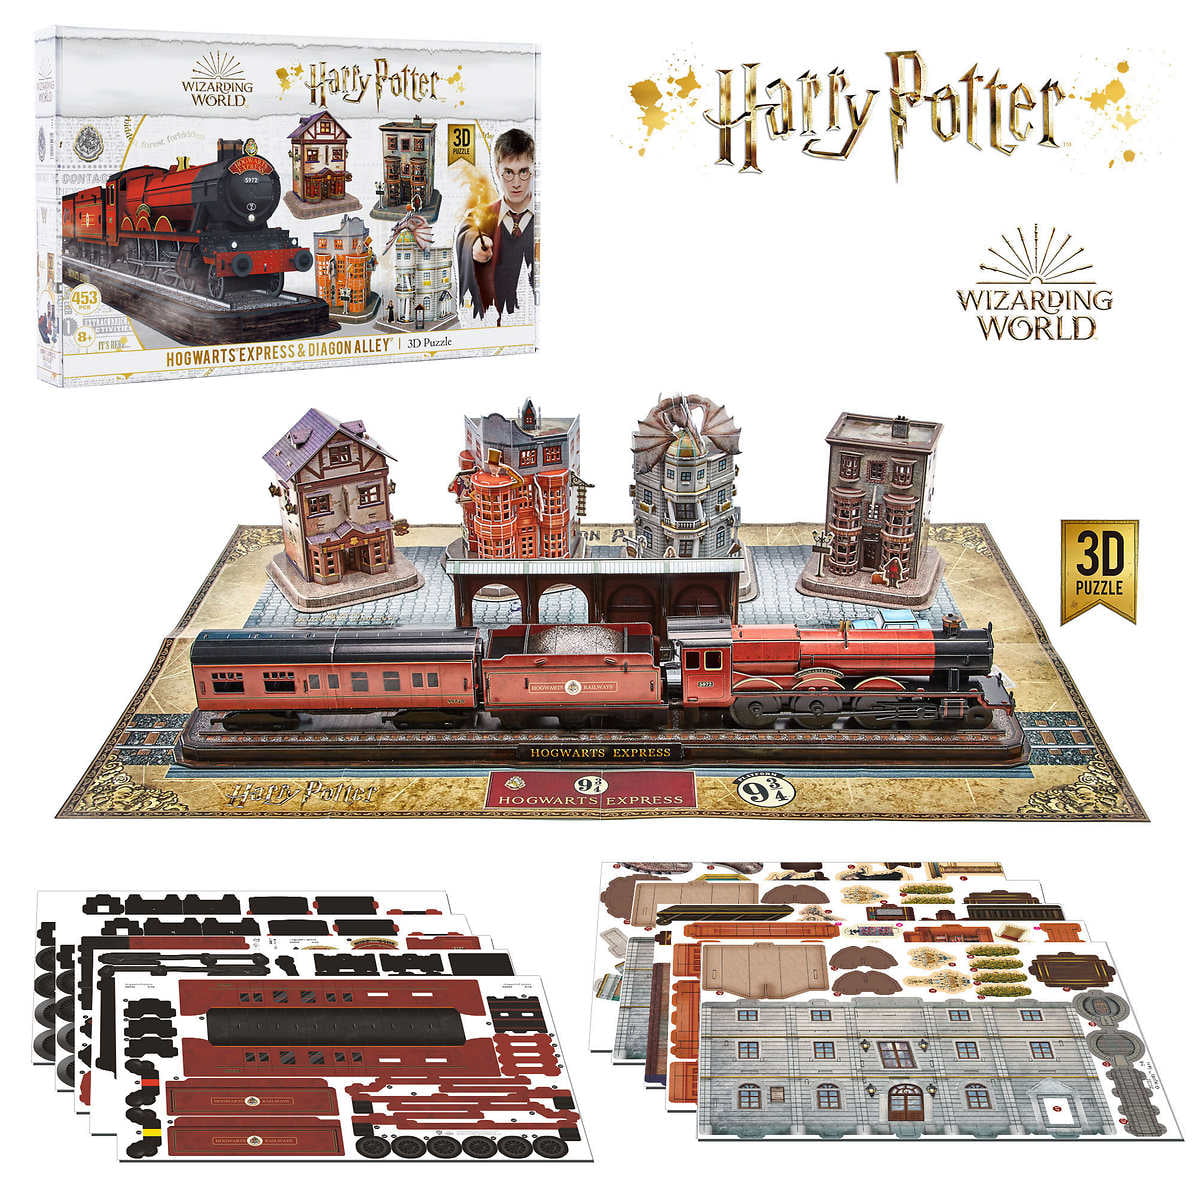 Harry Potter Hogwarts Express and Diagon Alley 3D Puzzle FAST FREE SHIPPING 